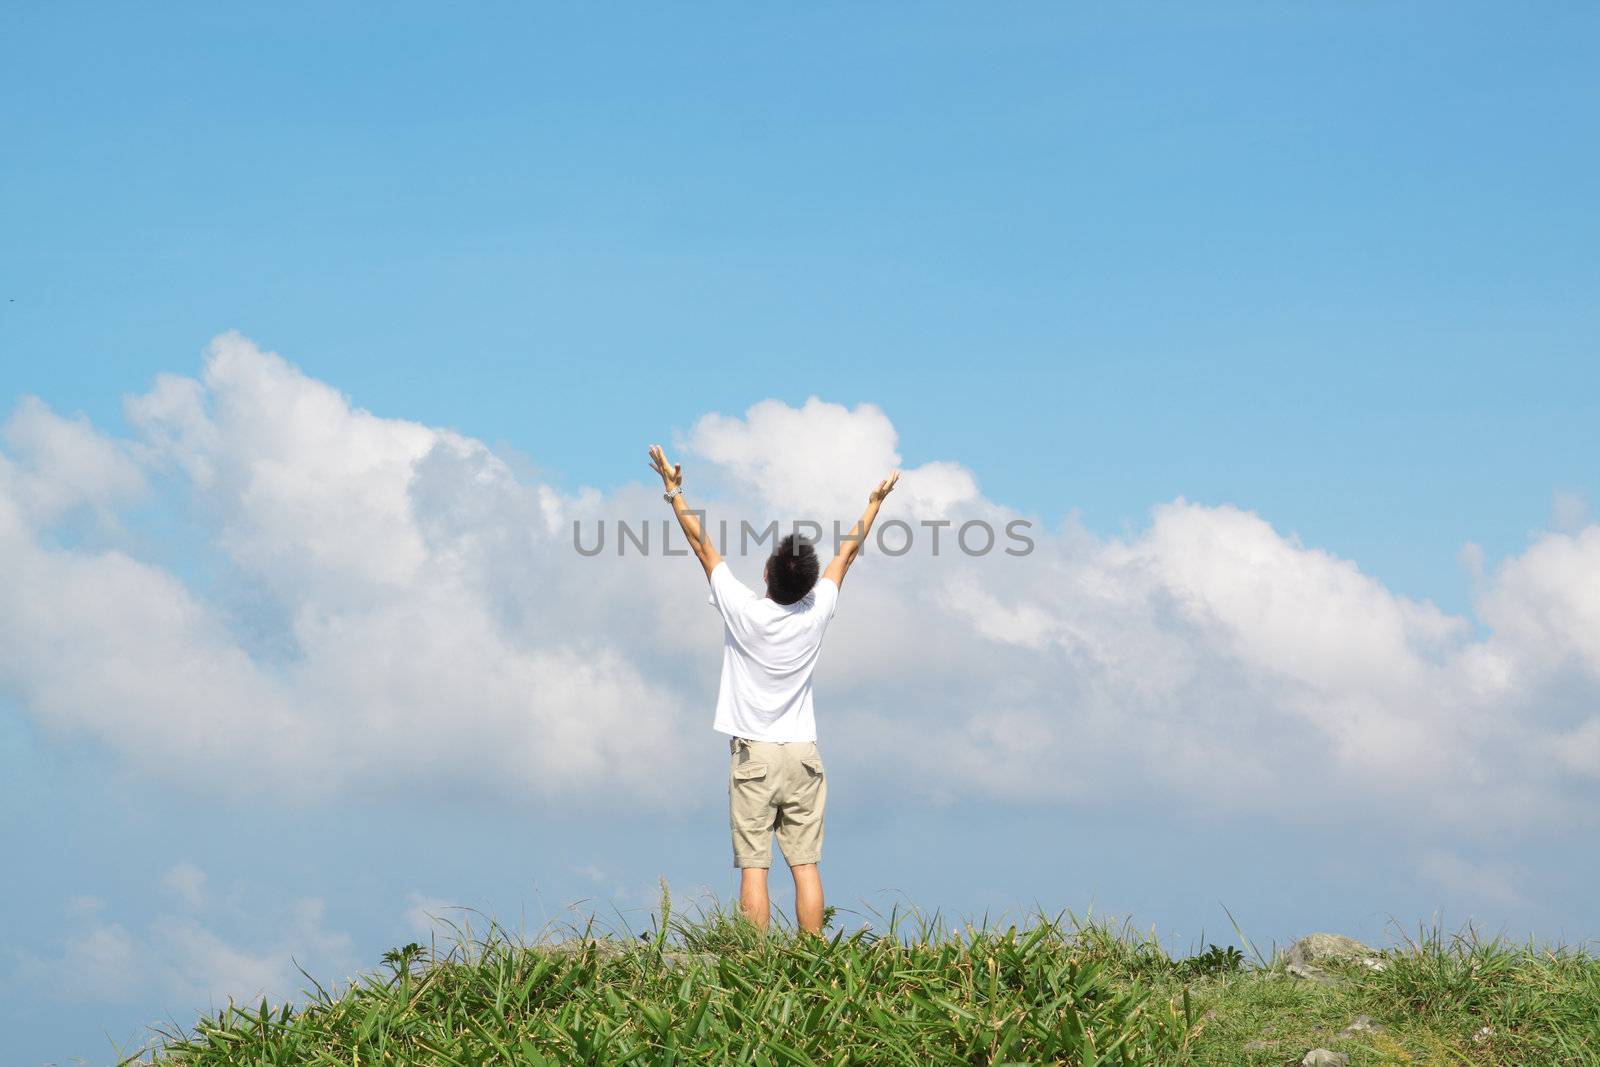 Meeting of the sky. The man on high mountain with the hands lifted above, on a background of blue sky